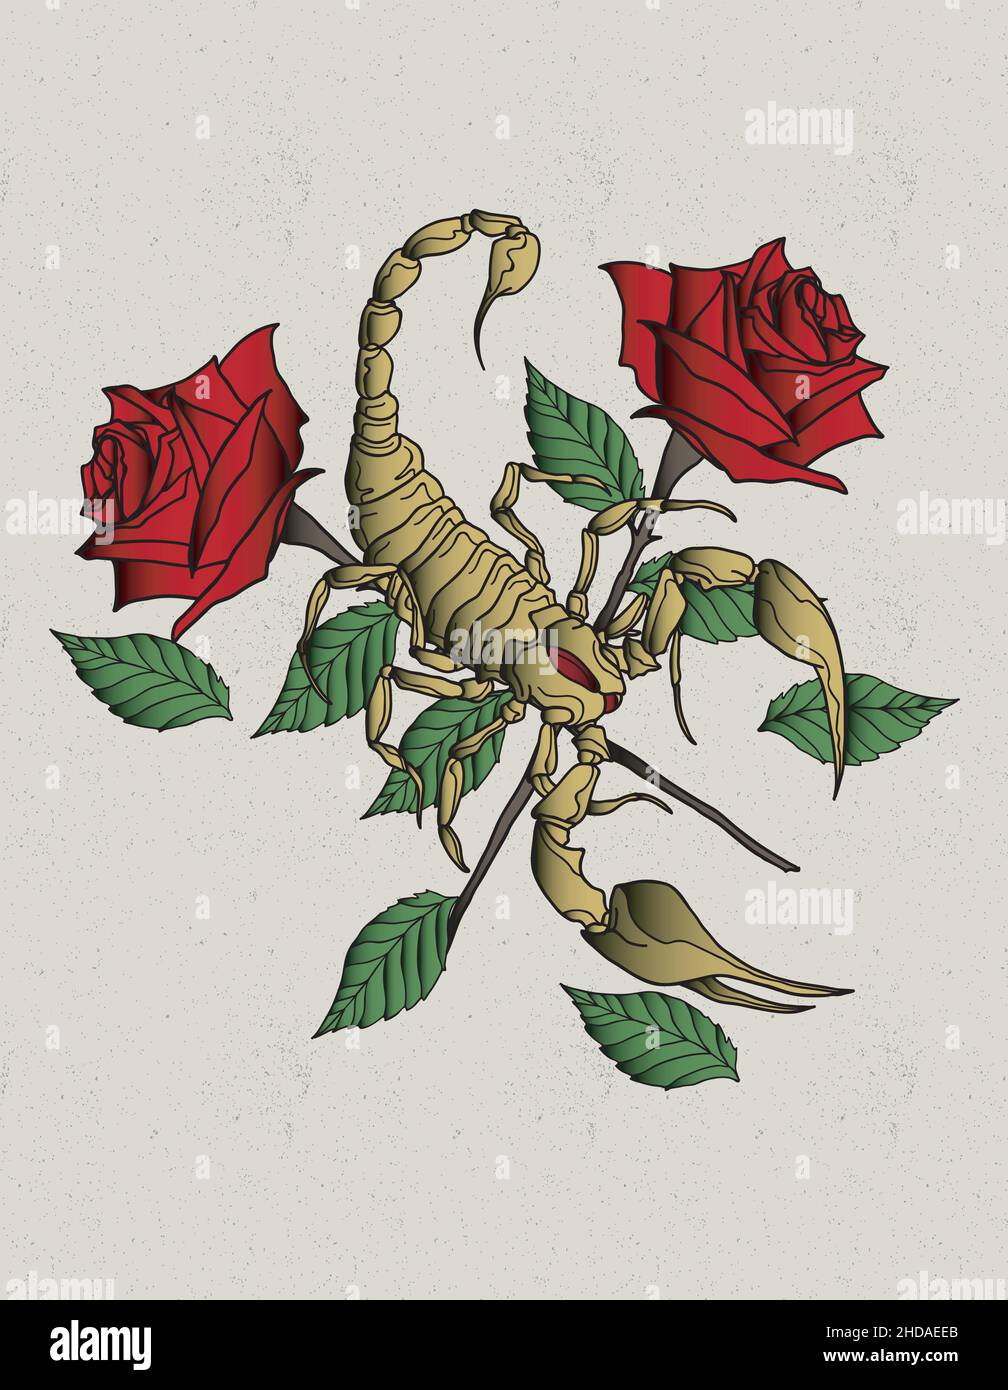 Scorpion and rose tattoo want it drawn better and done better but this is  the general idea  ไอเดยรอยสก